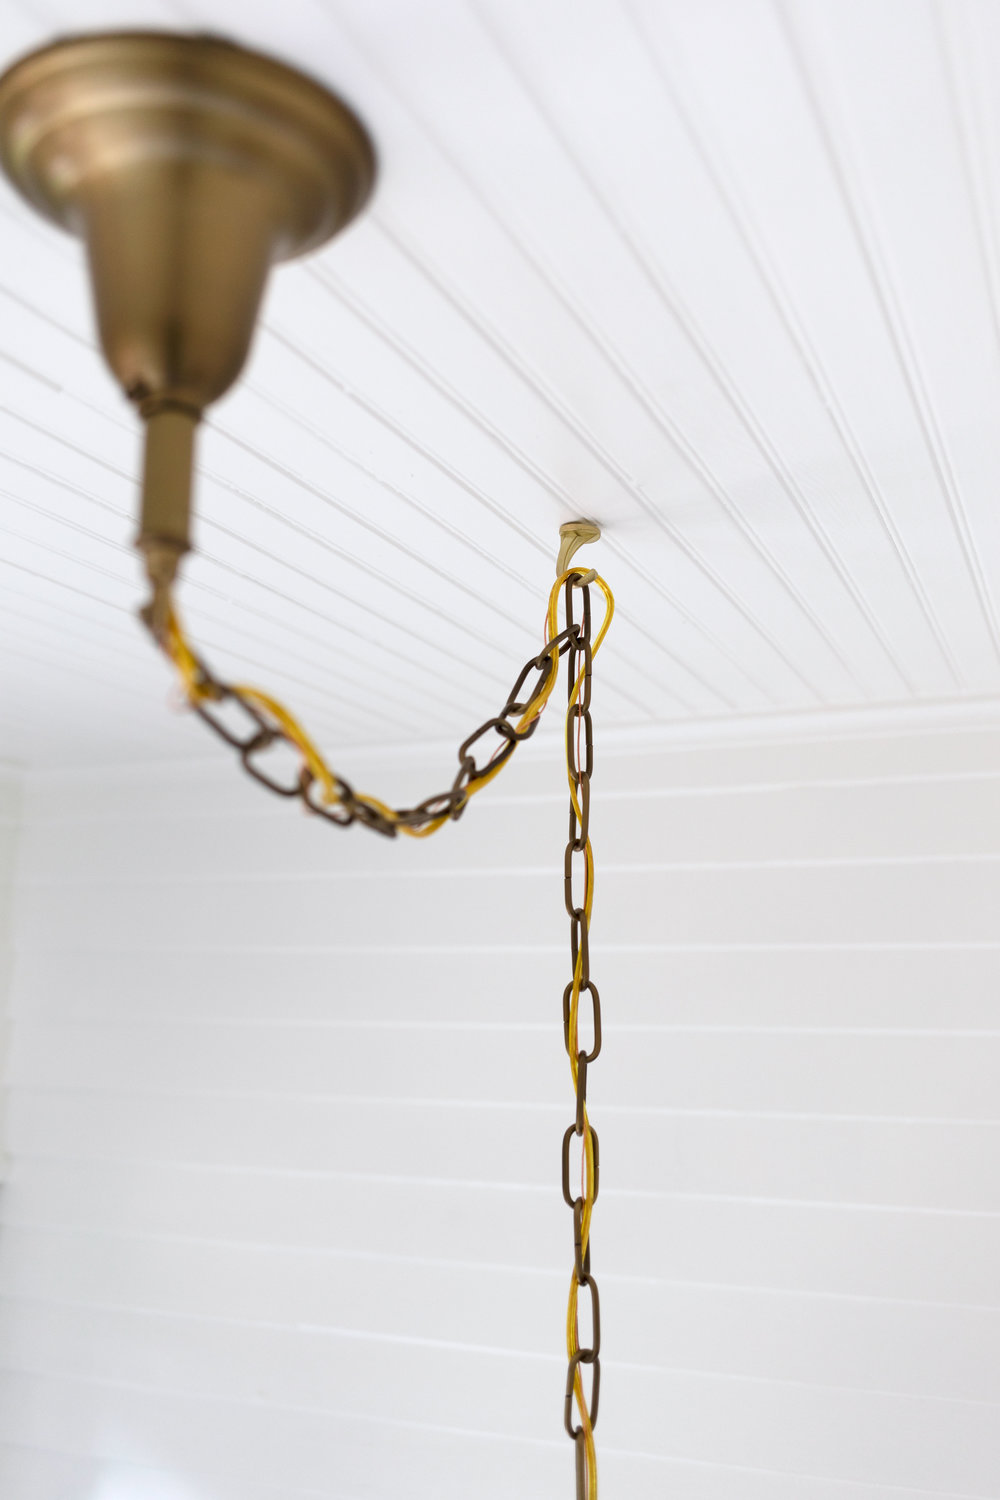 Center An Off Ceiling Light, How Do You Install A Hanging Light Fixture With Chain